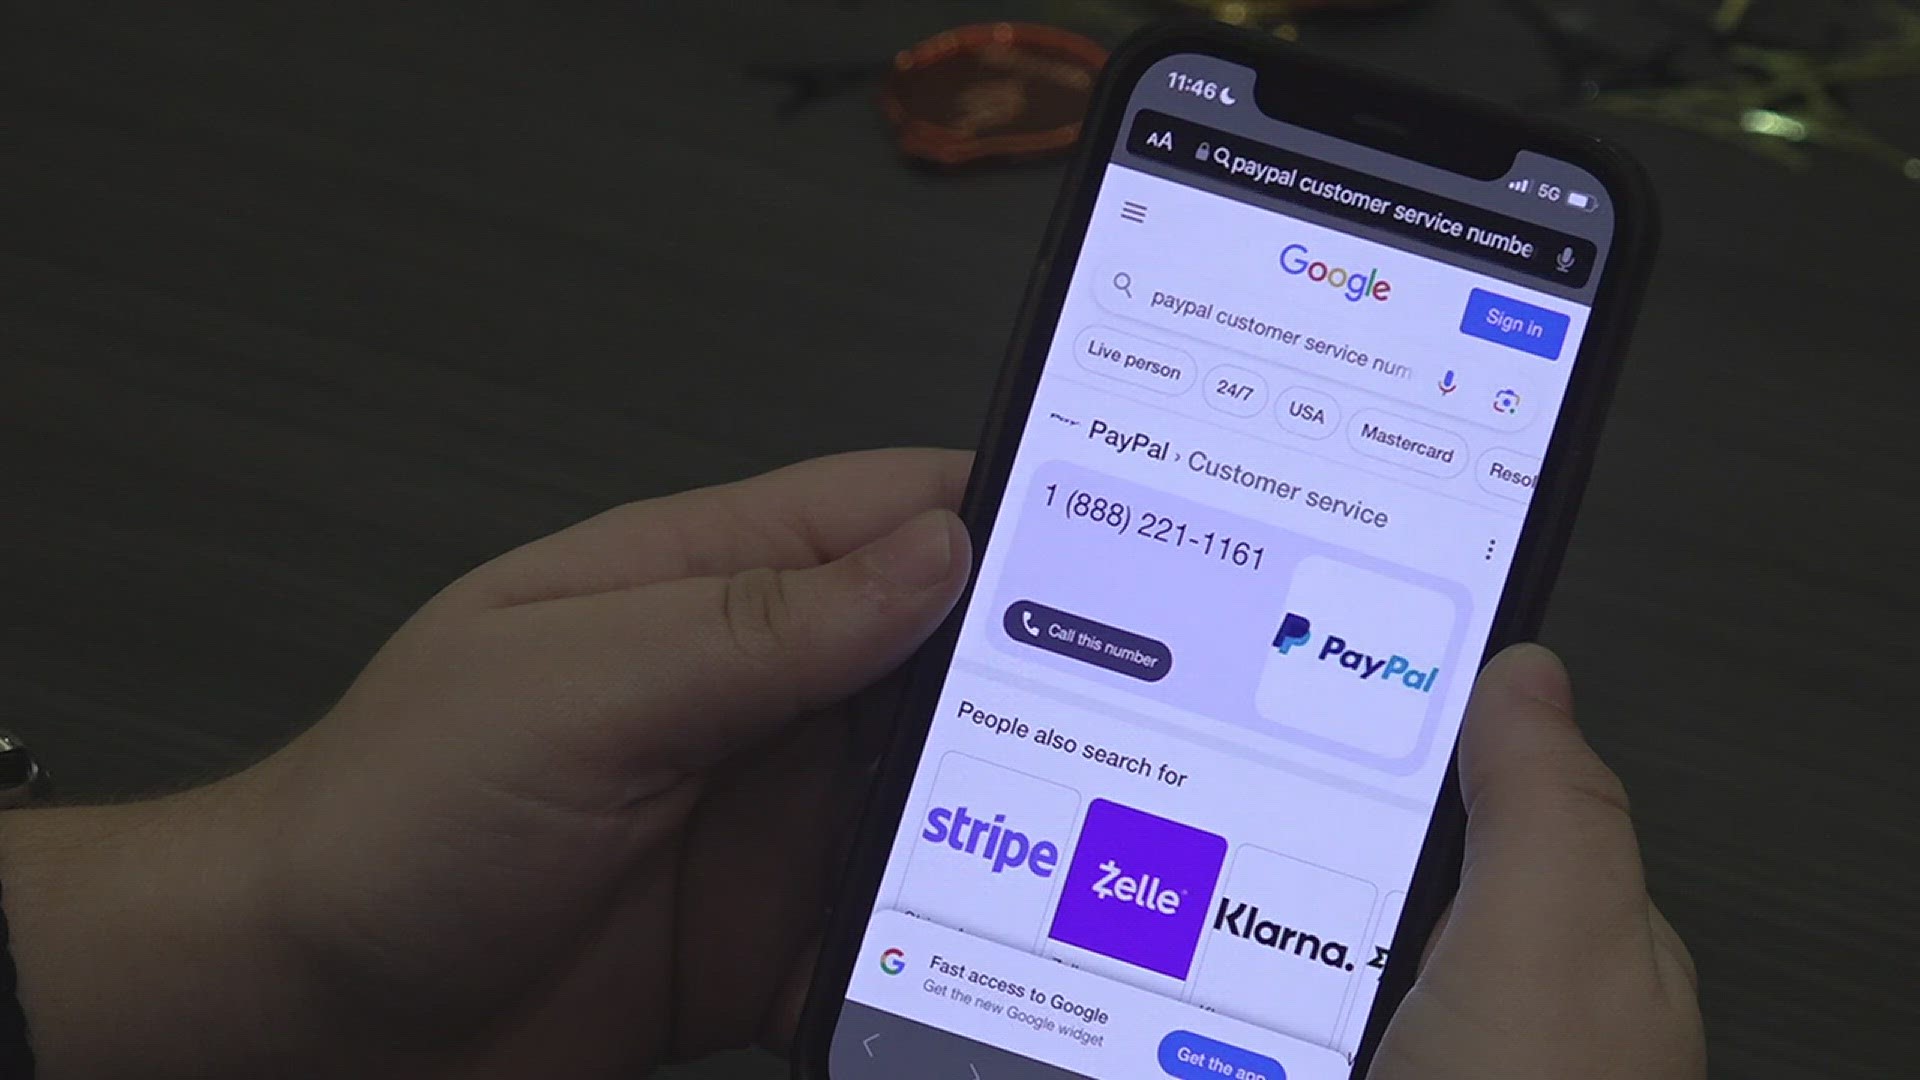 Victims of this scam are reporting that at first they believe they are on the phone with PayPal's customer service, but instead are talking to a scammer.